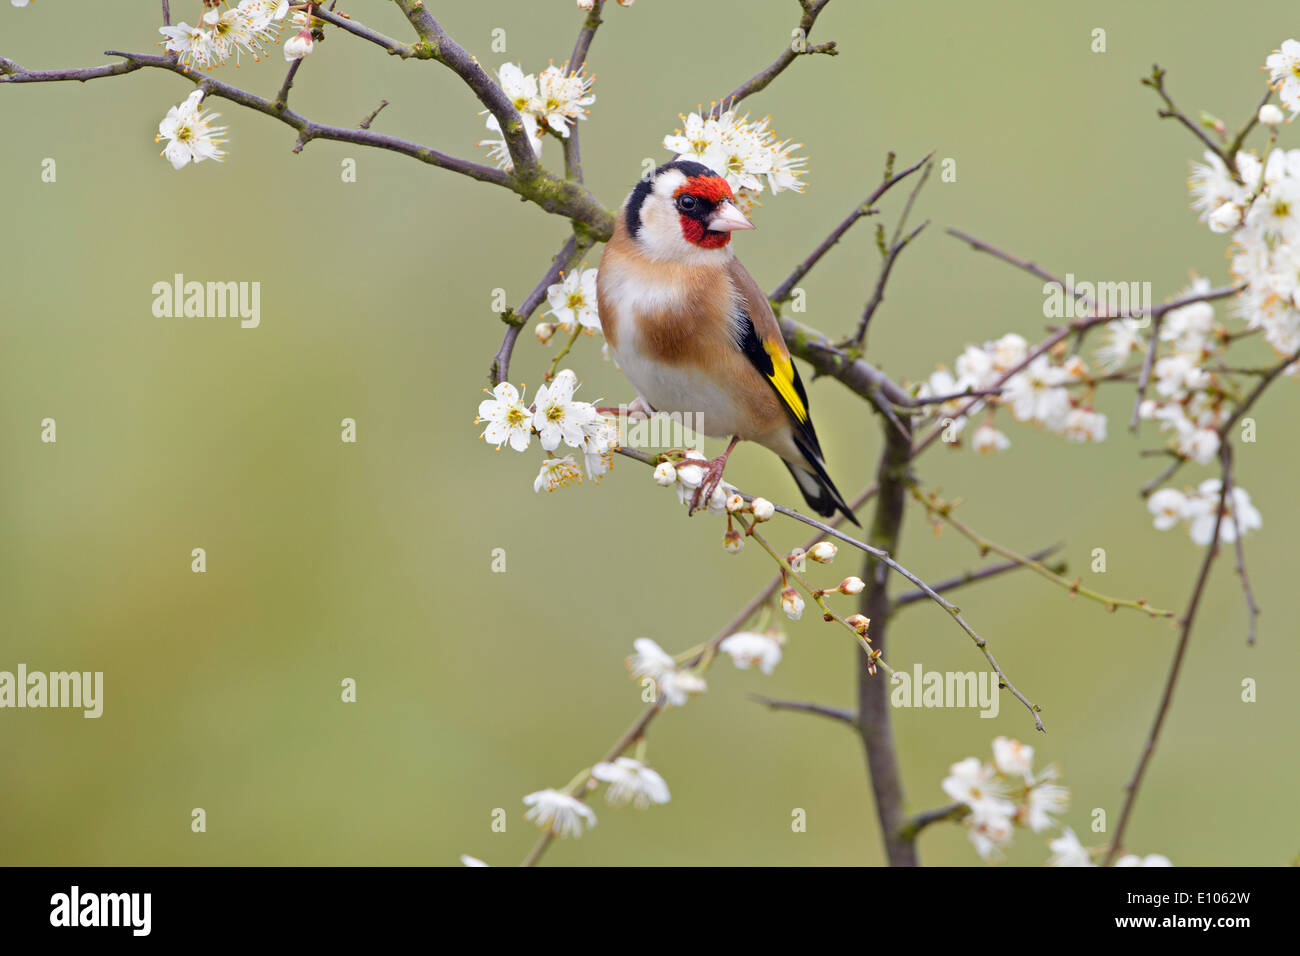 Goldfinch Carduelis carduelis on Spring blackthorn Prunus spinosa, Blossom Stock Photo